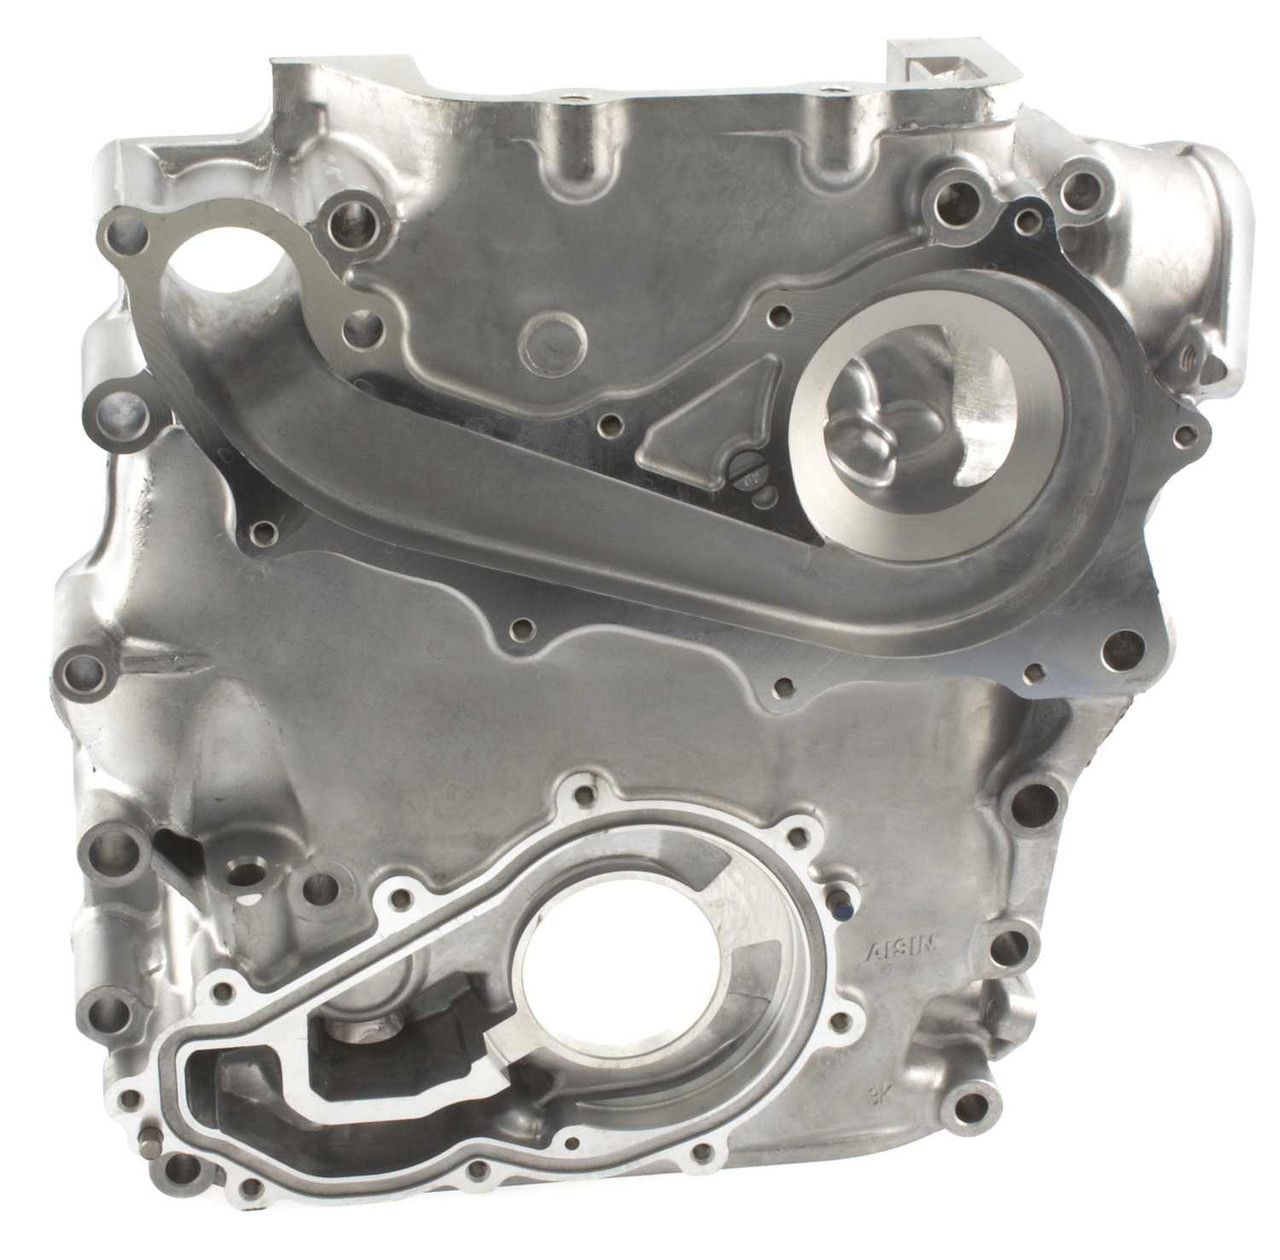 Timing Cover - Toyota 2.7L 3RZ-FE 4Runner, T100 & Tacoma OEM Timing Cover (1995-2004) TCT-069